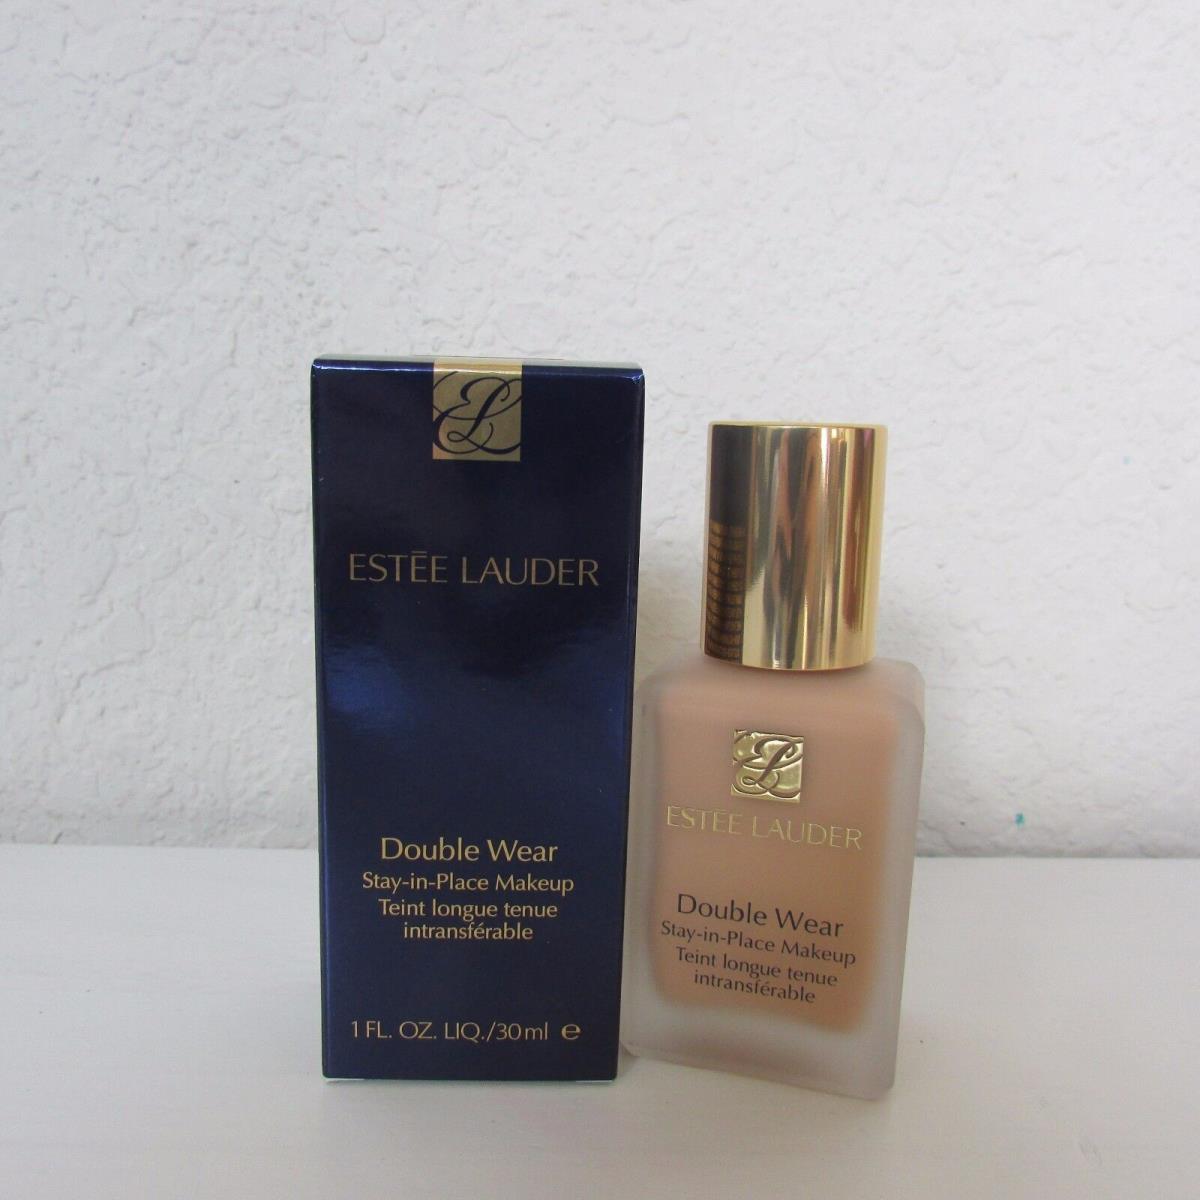 Estee Lauder Double Wear Stay-in-place Makeup Choose Your Shade 1.0 Oz/30 ml 3C1 Dusk